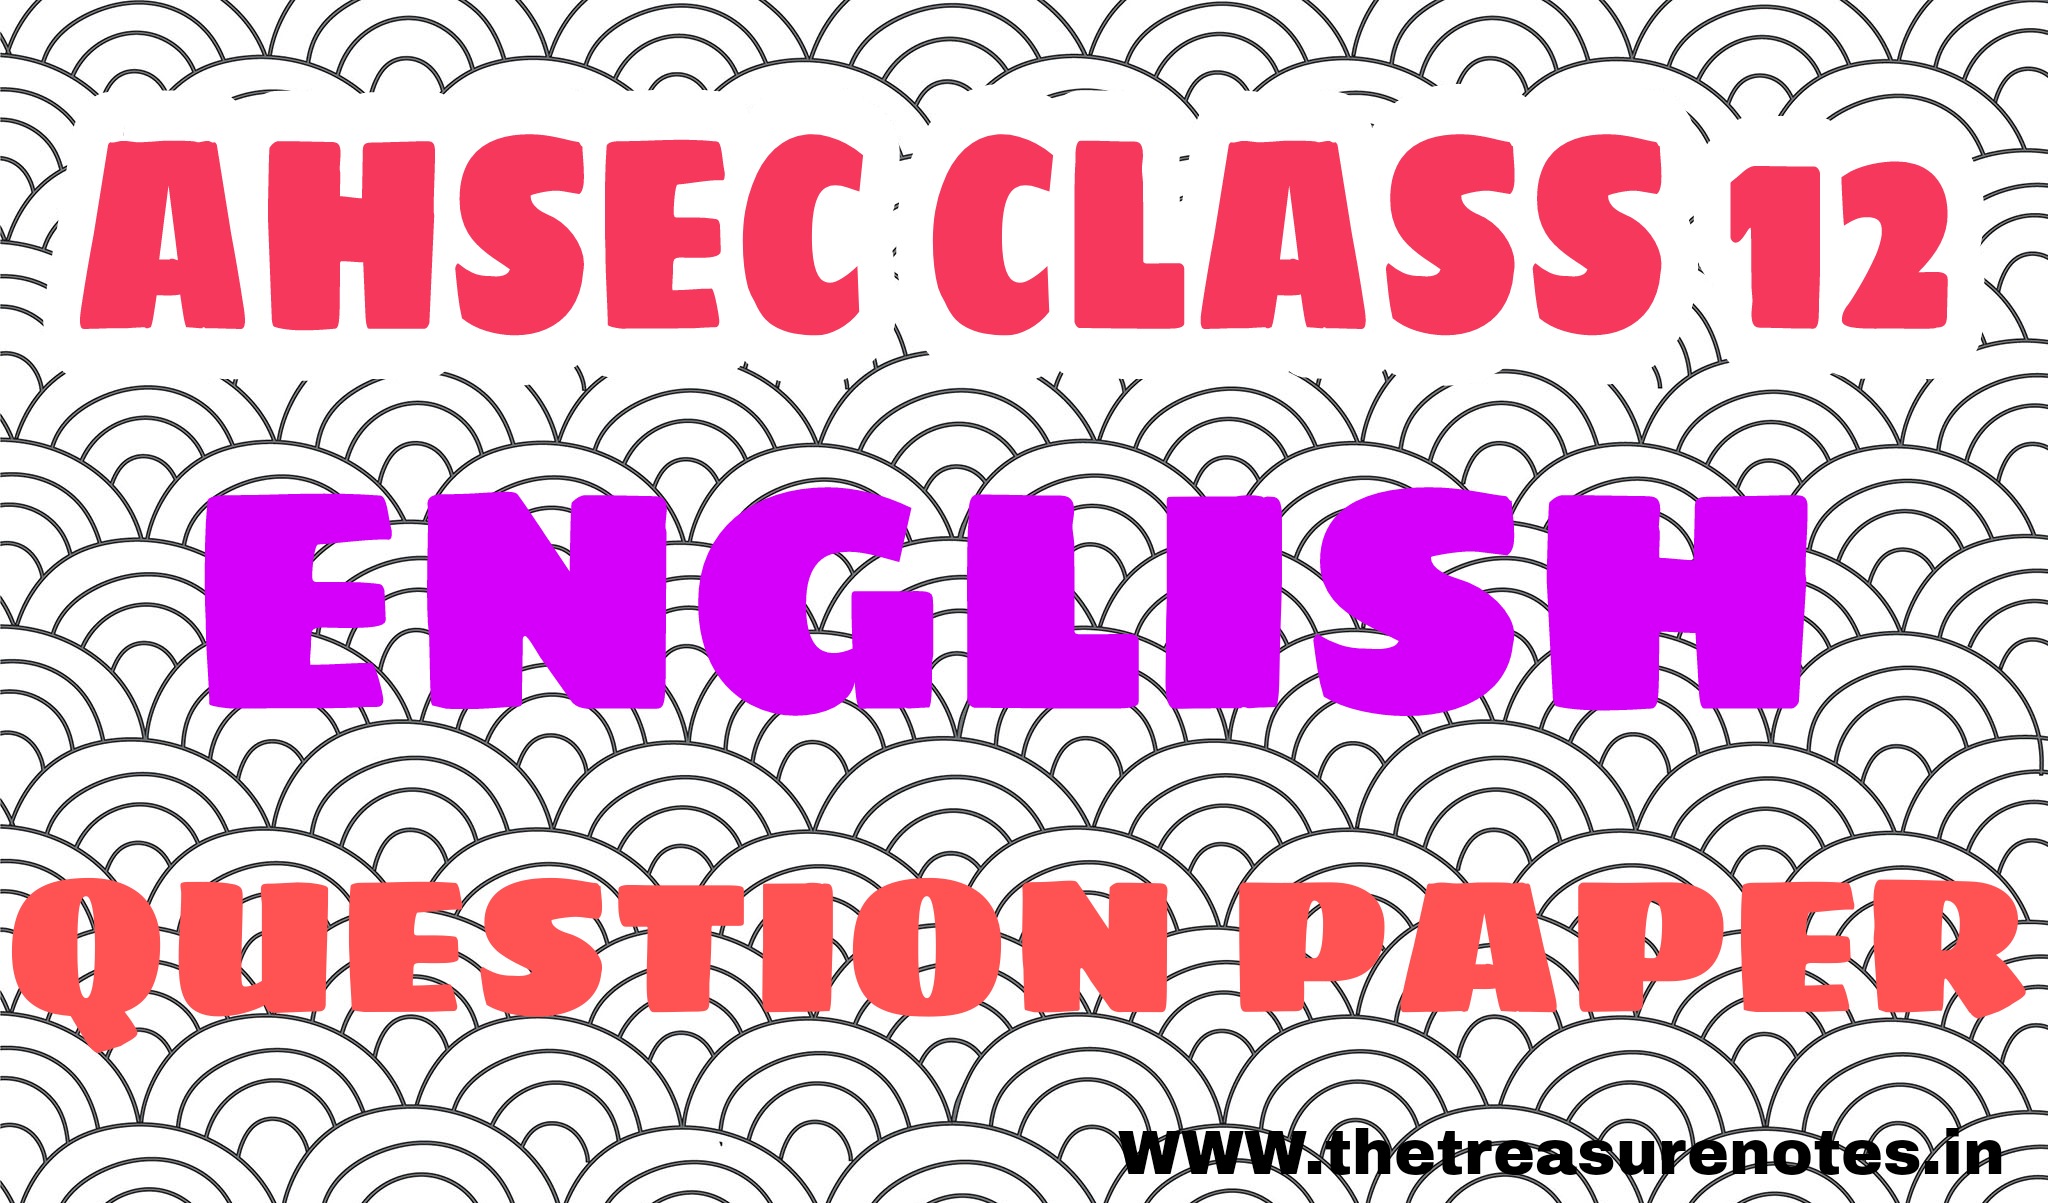 AHSEC Class 12 English Question paper'2014 | HS 2nd Year English Question paper '2014, Download Assam Class 12 English Question paper 2014,Hs 2nd year English Question paper